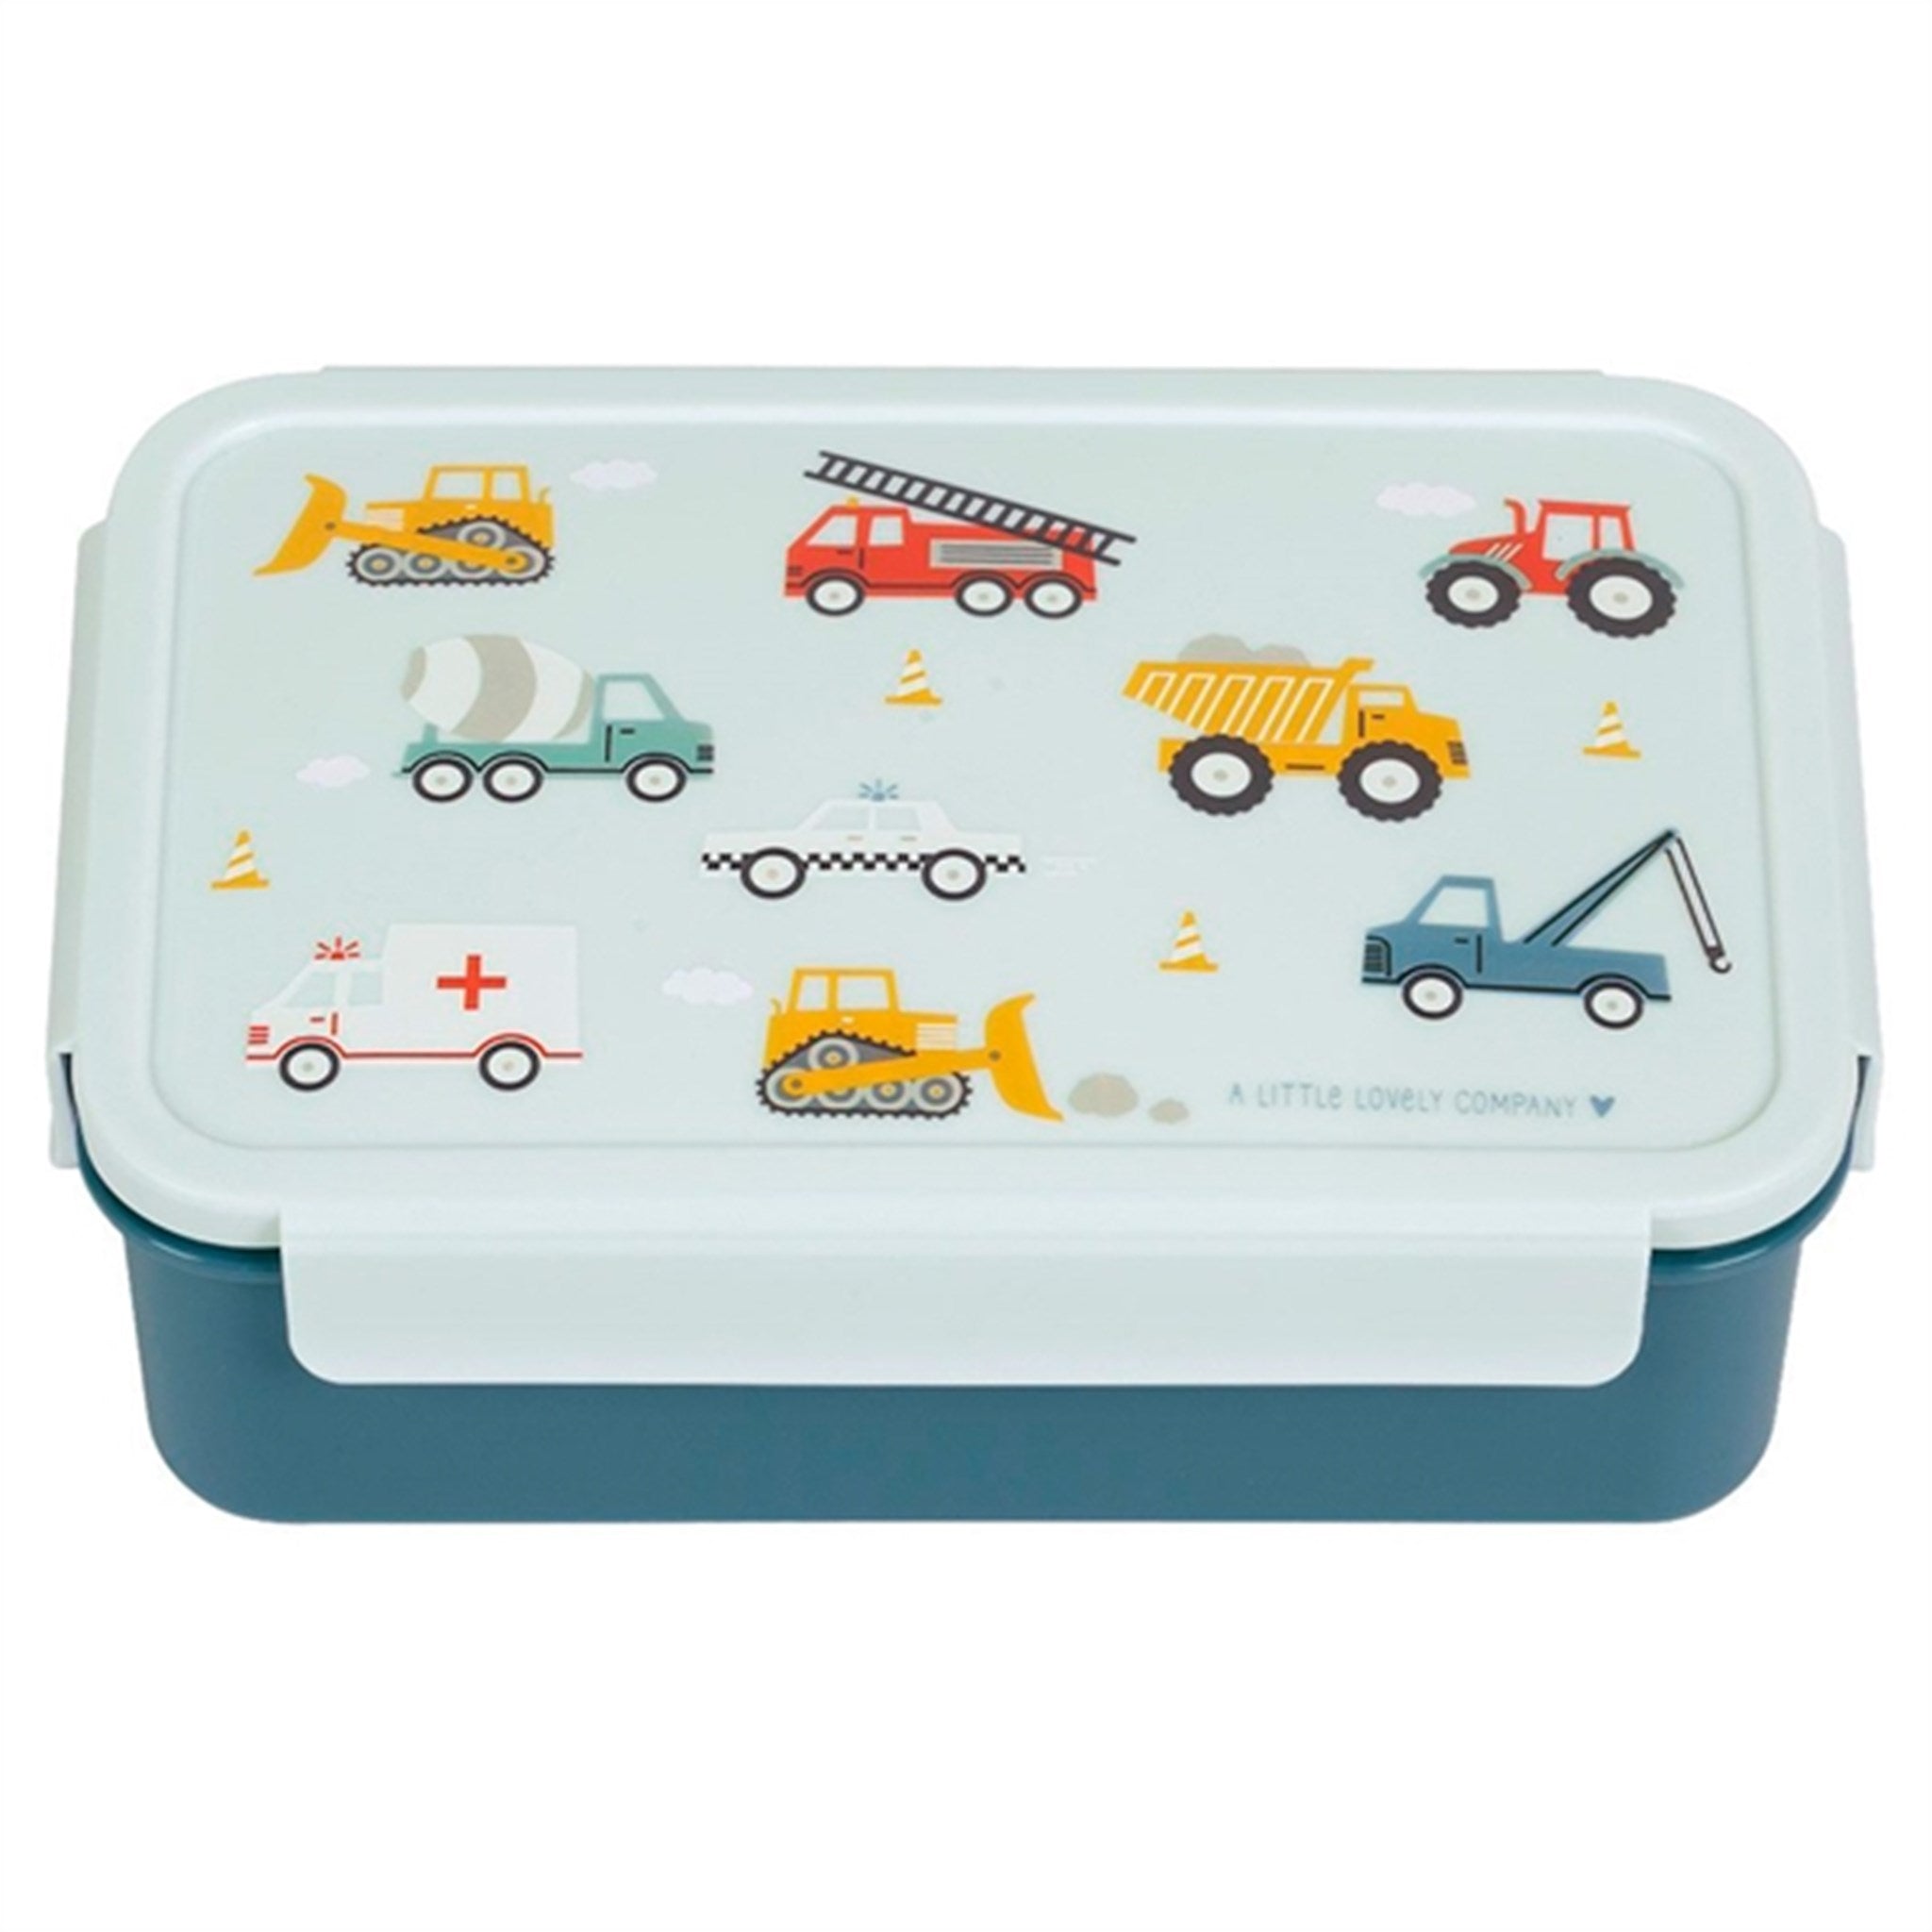 A Little Lovely Company Bento Madkasse Vehicles